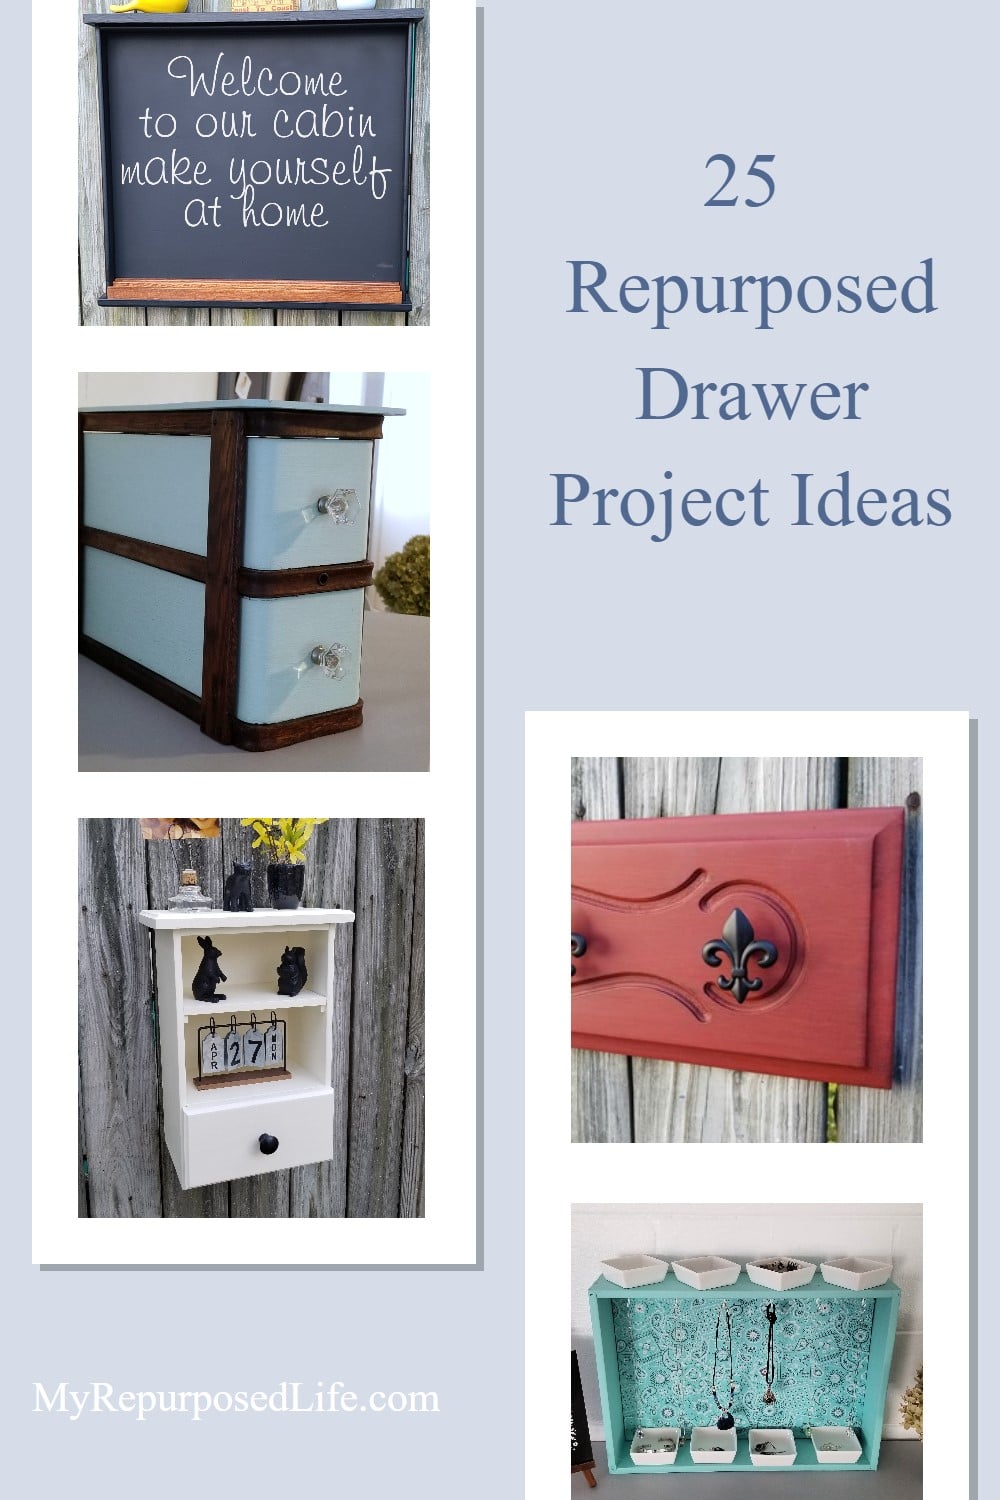 More than 25 repurposed drawer ideas and projects to inspire you to use those old, orphan drawers you have laying around. So many unique ideas in one place. Ideas for shelves, cubbies, pets and more. #MyRepurposedLife #repurposed #drawer #furniture #ideas via @repurposedlife